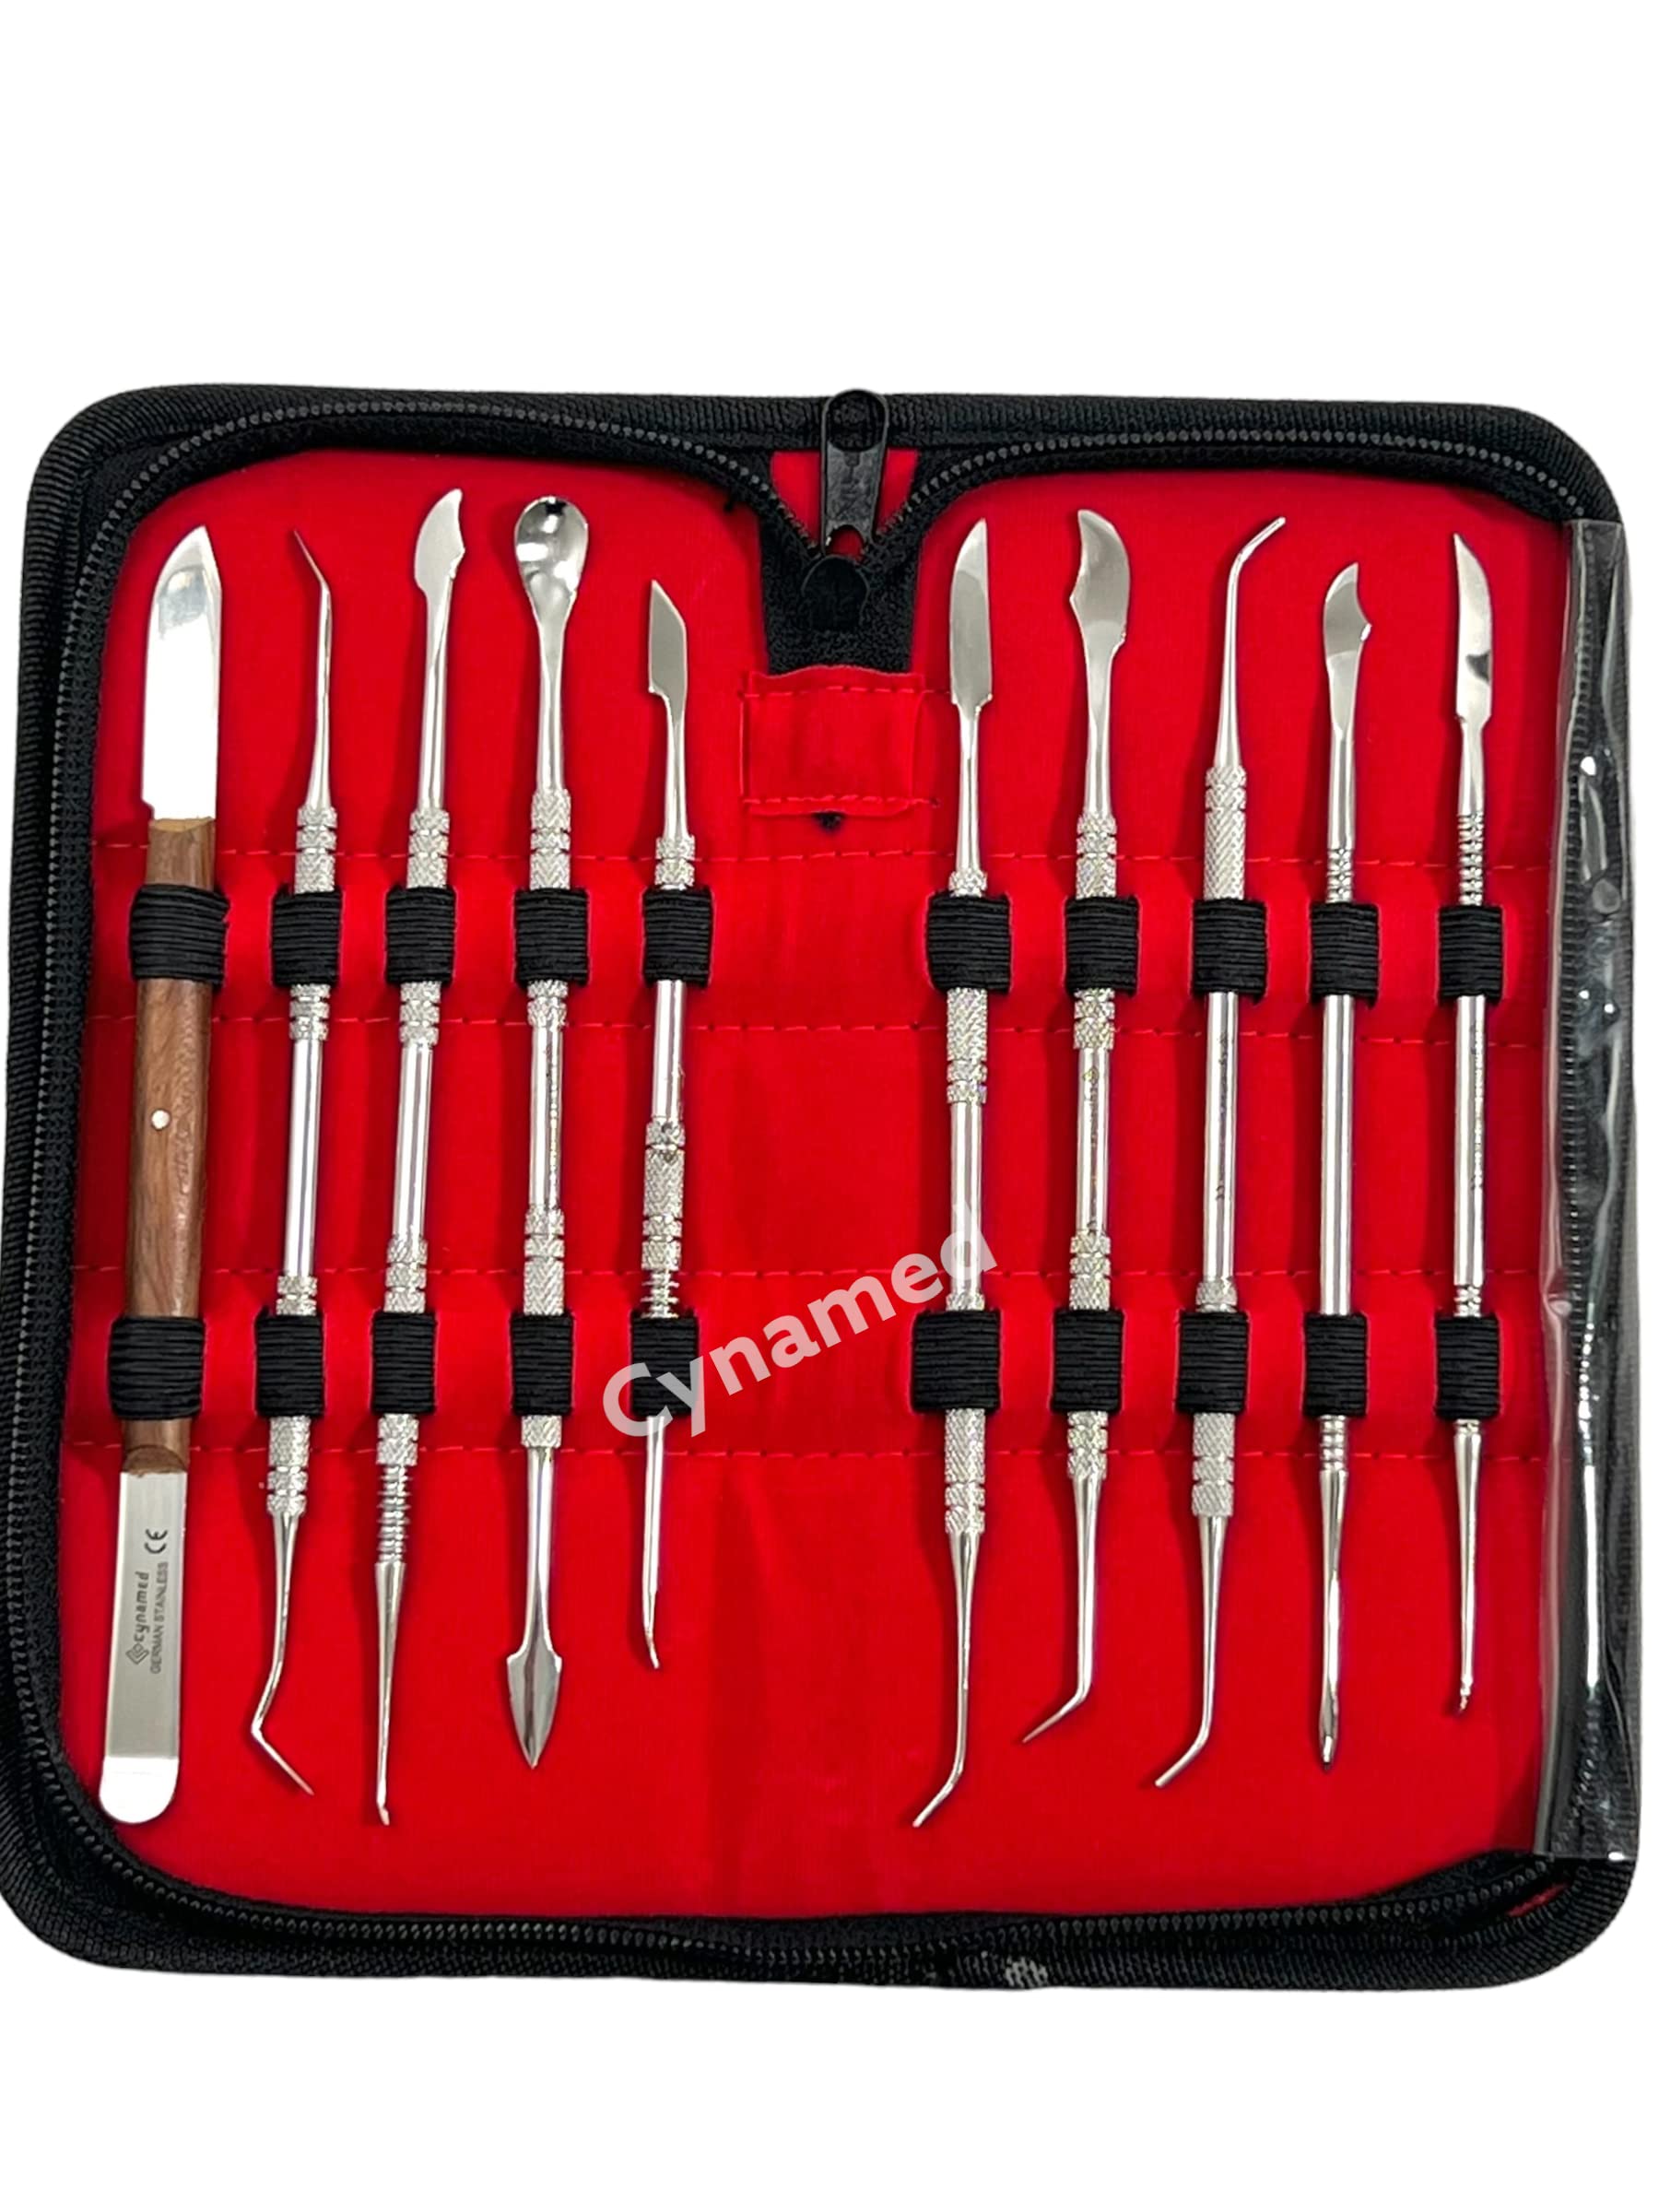 New Premium Wax Carving Tools Set – Stainless Steel Wax & Clay Sculpting Tools – Double Ended Dental and Wax Carvers Tools for Carving Modeling Sculpting and Shaping (Wax Carver Set of 10)